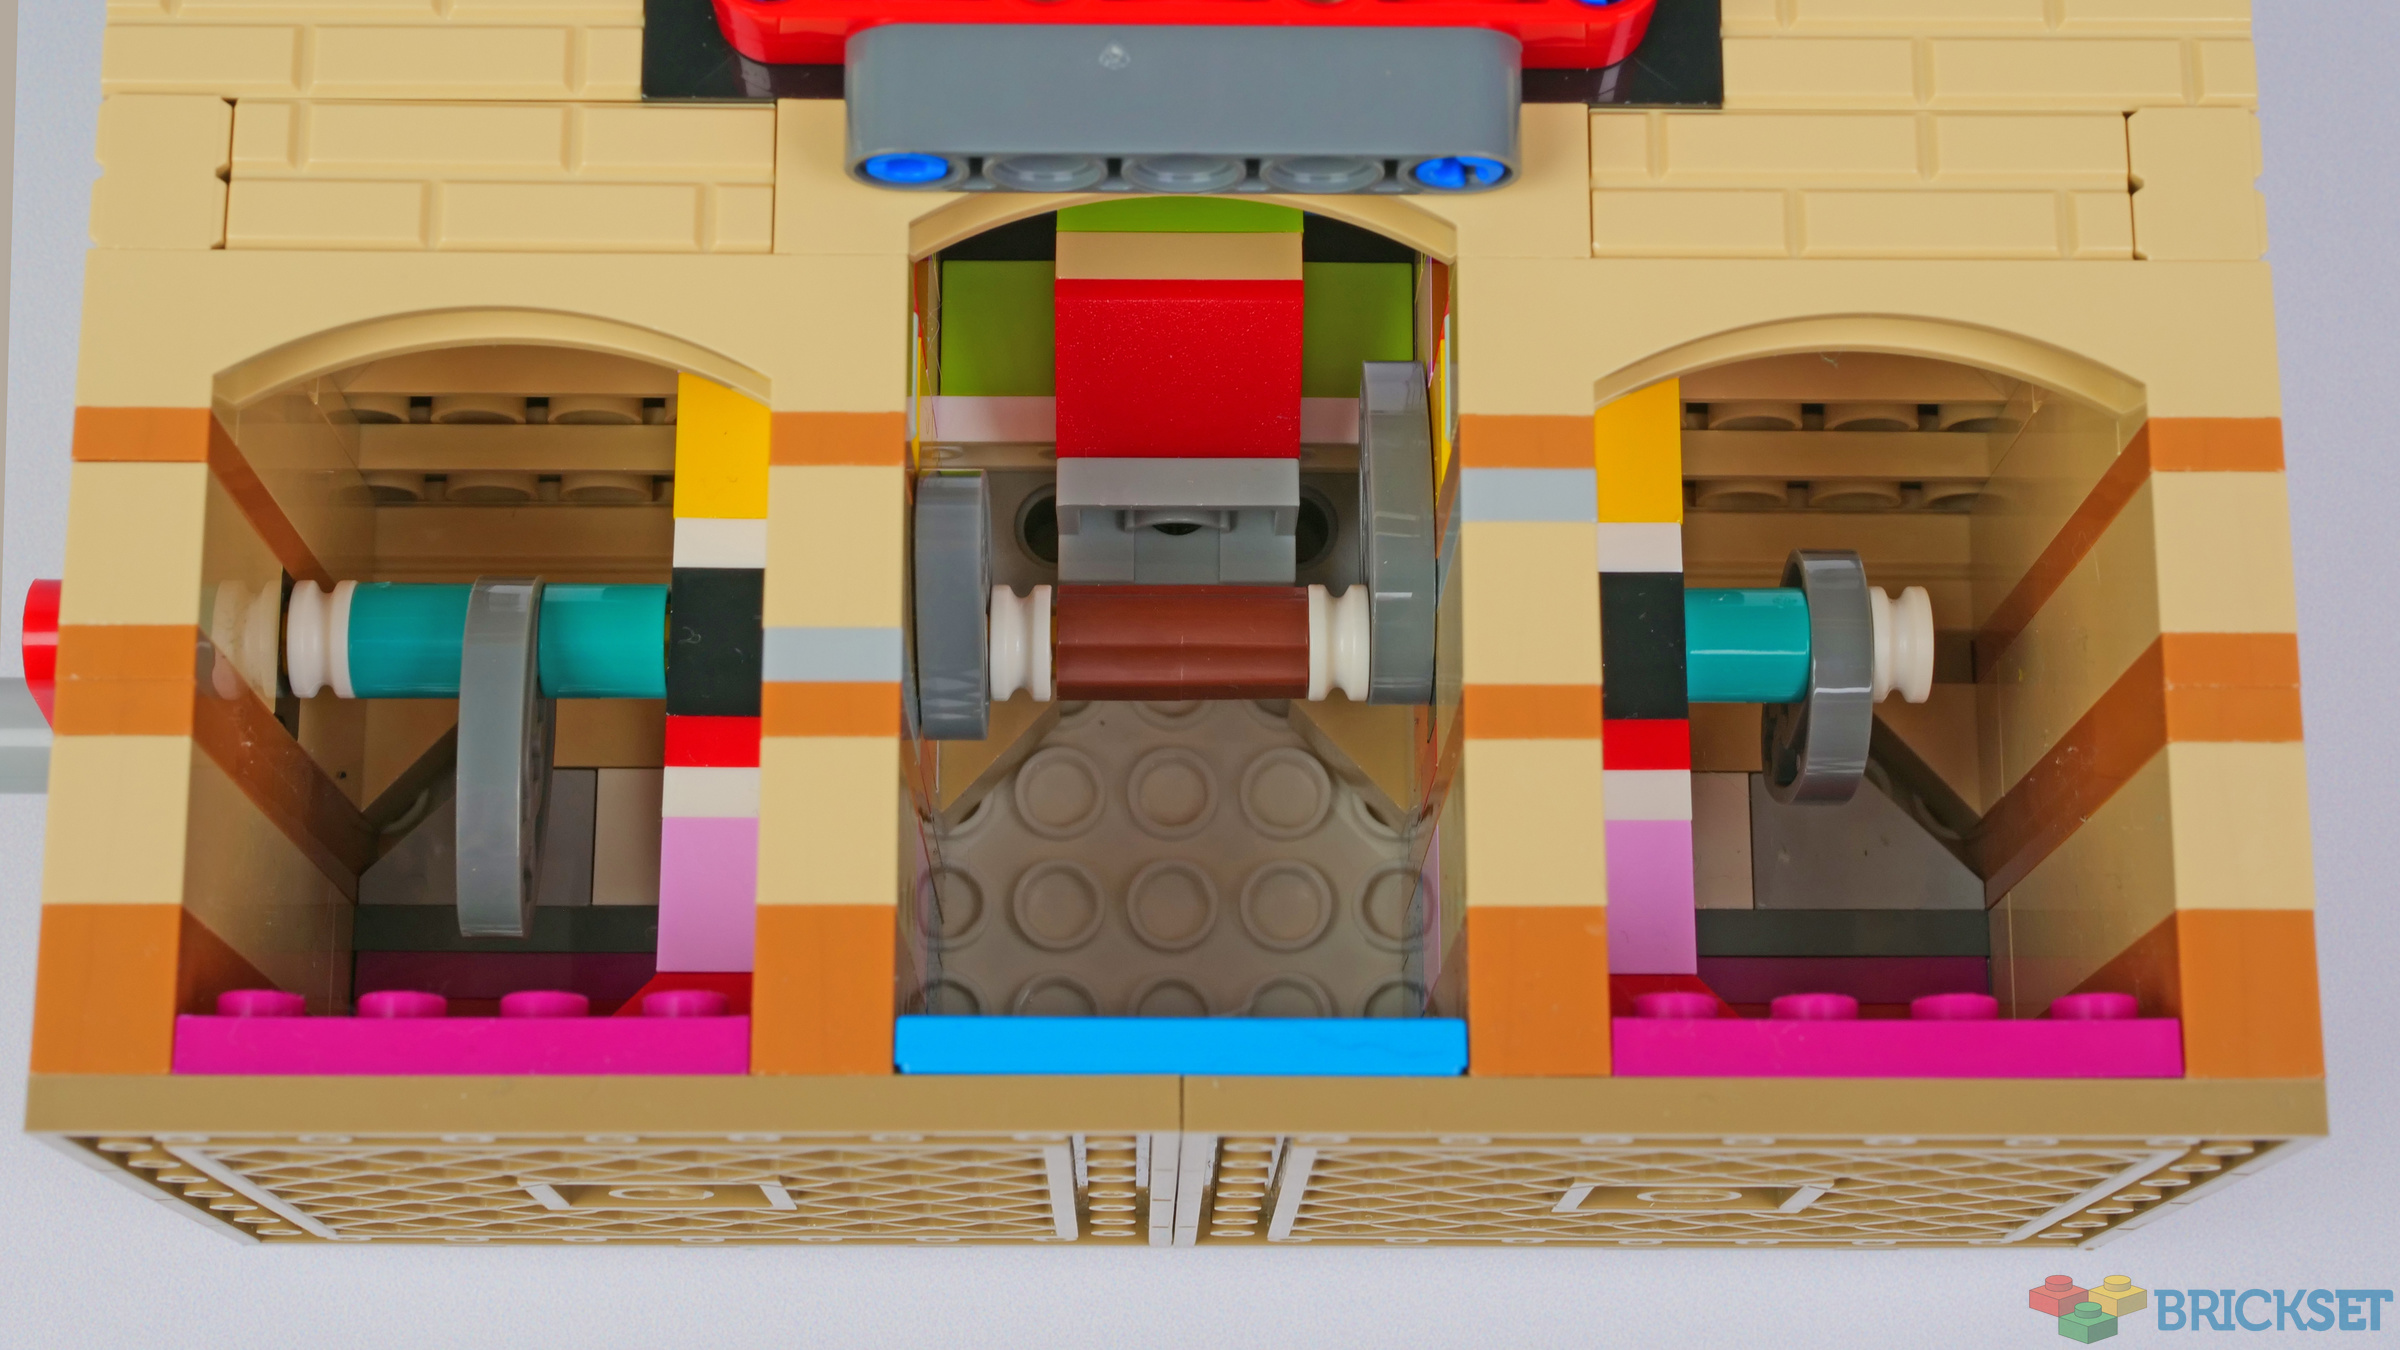 Review: LEGO 40634 Icons of Play - Jay's Brick Blog